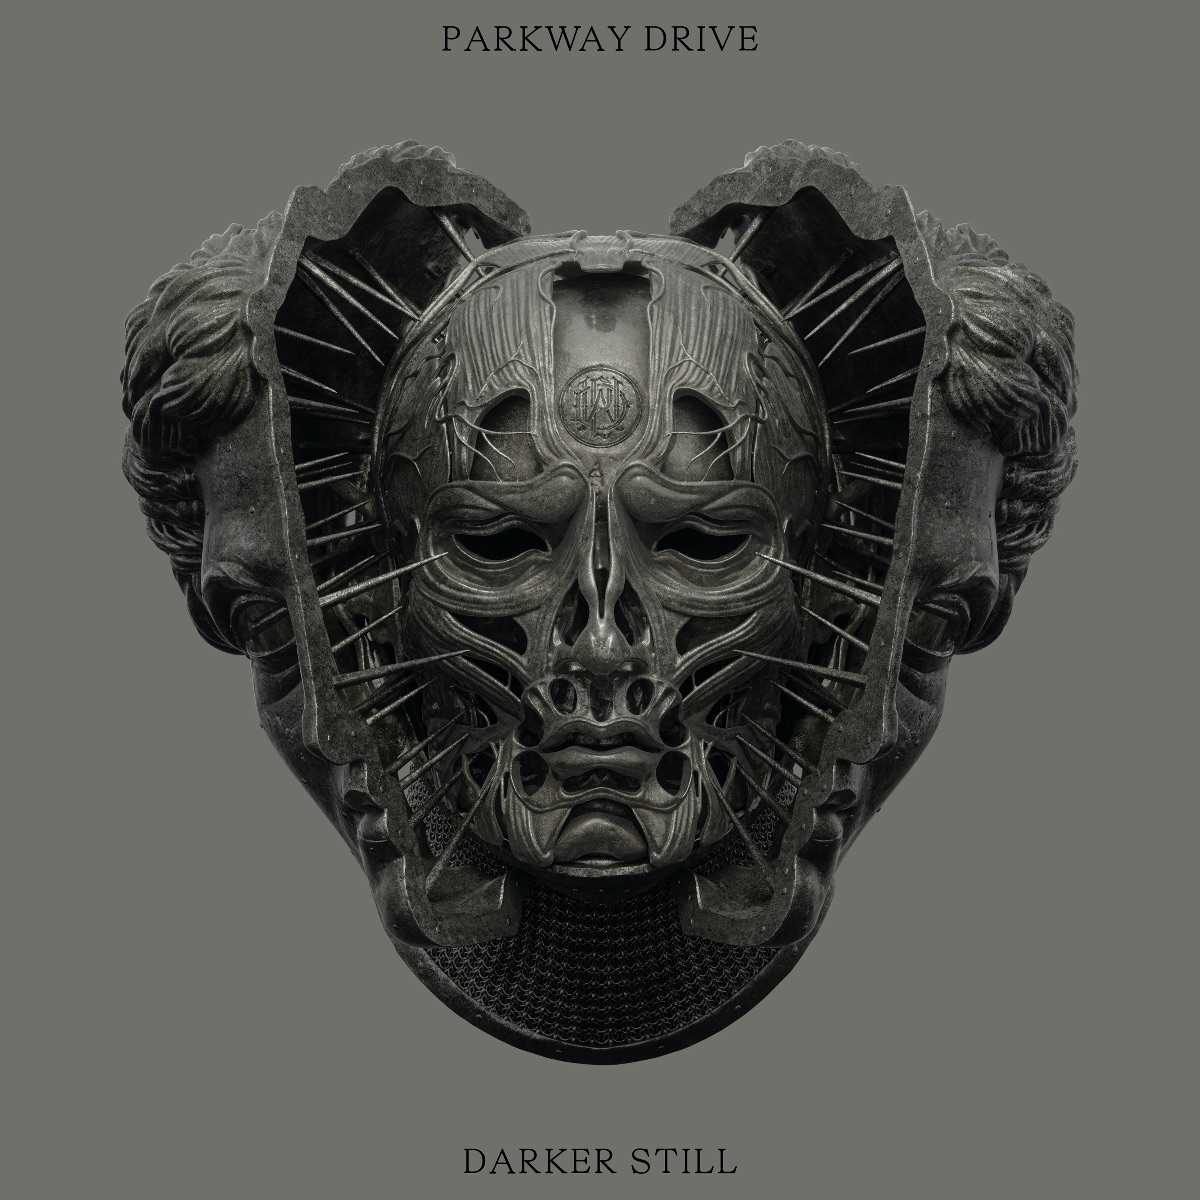 Parkway Drive Announce "Darker Still" Out 9/9 + Band Shares "The Greatest Fear" Video